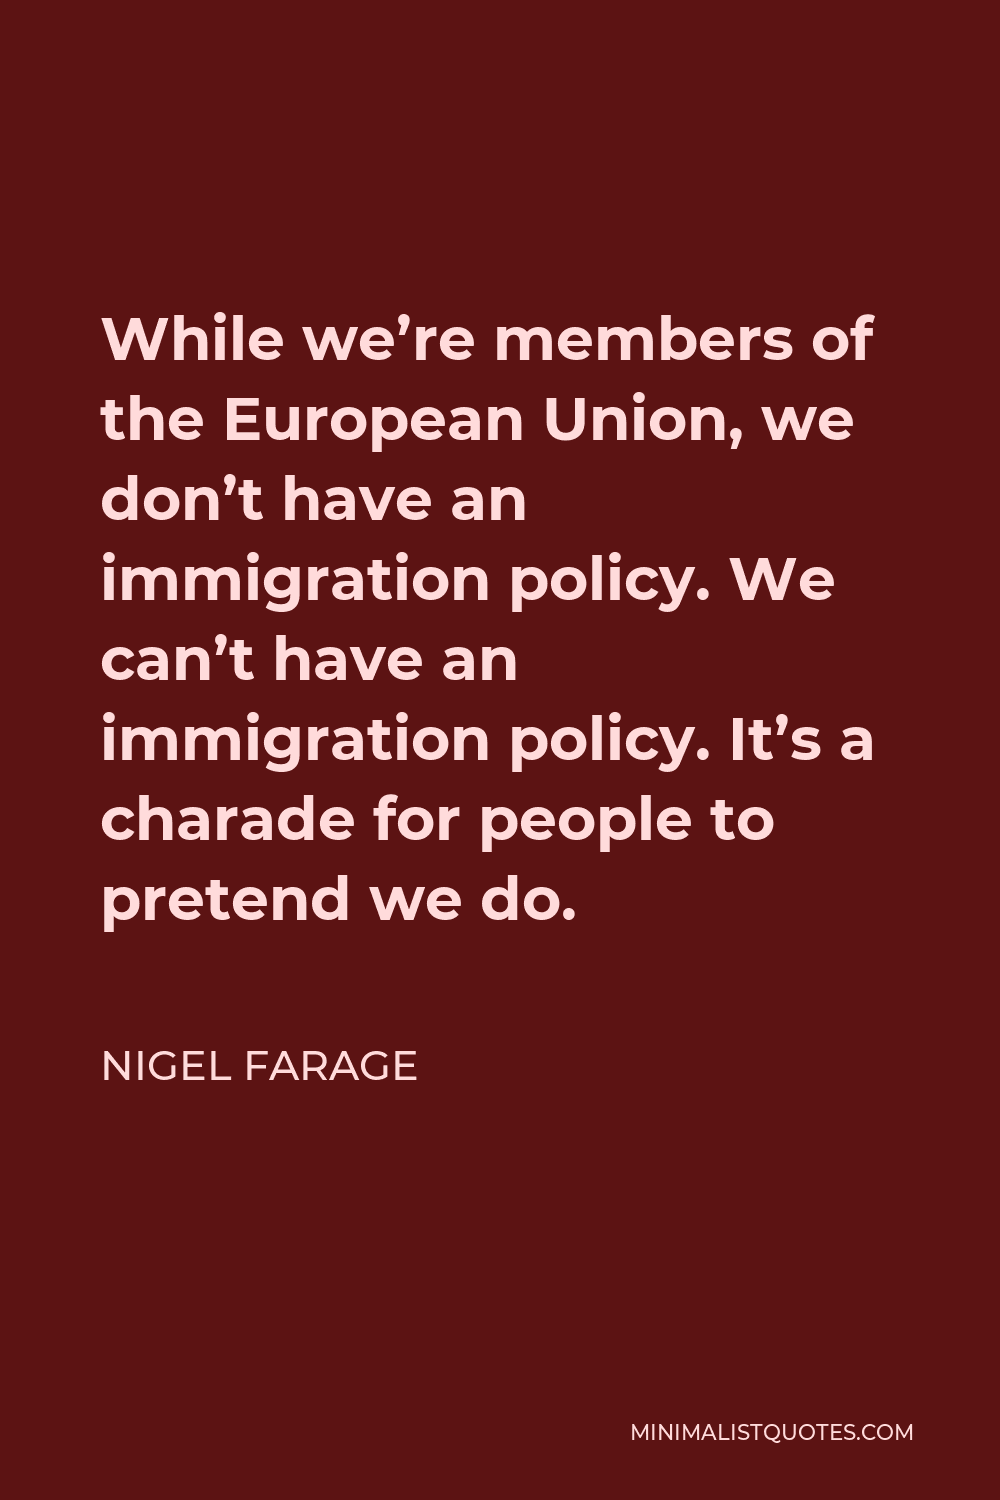 Nigel Farage Quote - While we’re members of the European Union, we don’t have an immigration policy. We can’t have an immigration policy. It’s a charade for people to pretend we do.